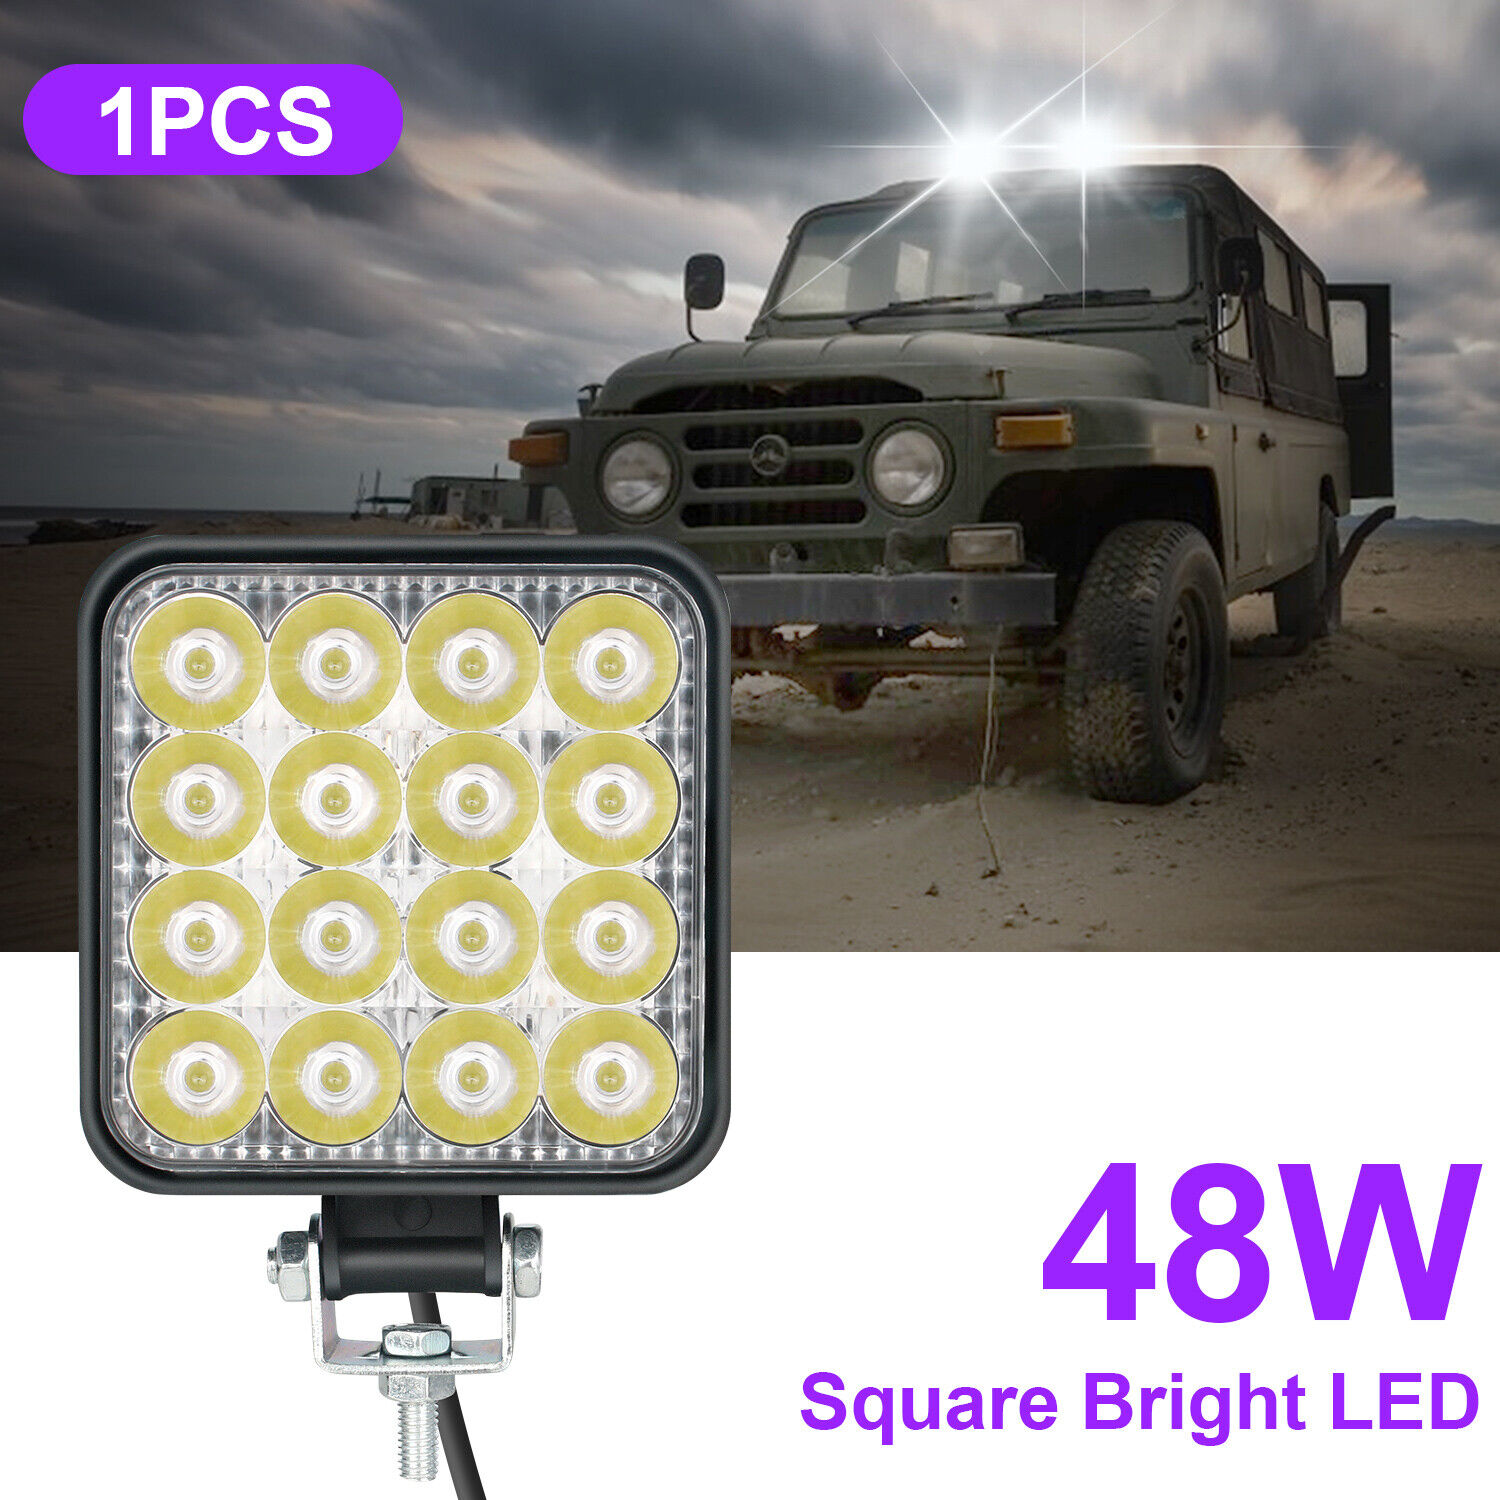 1-20pcs 48W Square LED Work Light Truck OffRoad Tractor Flood Lights 2-Colors